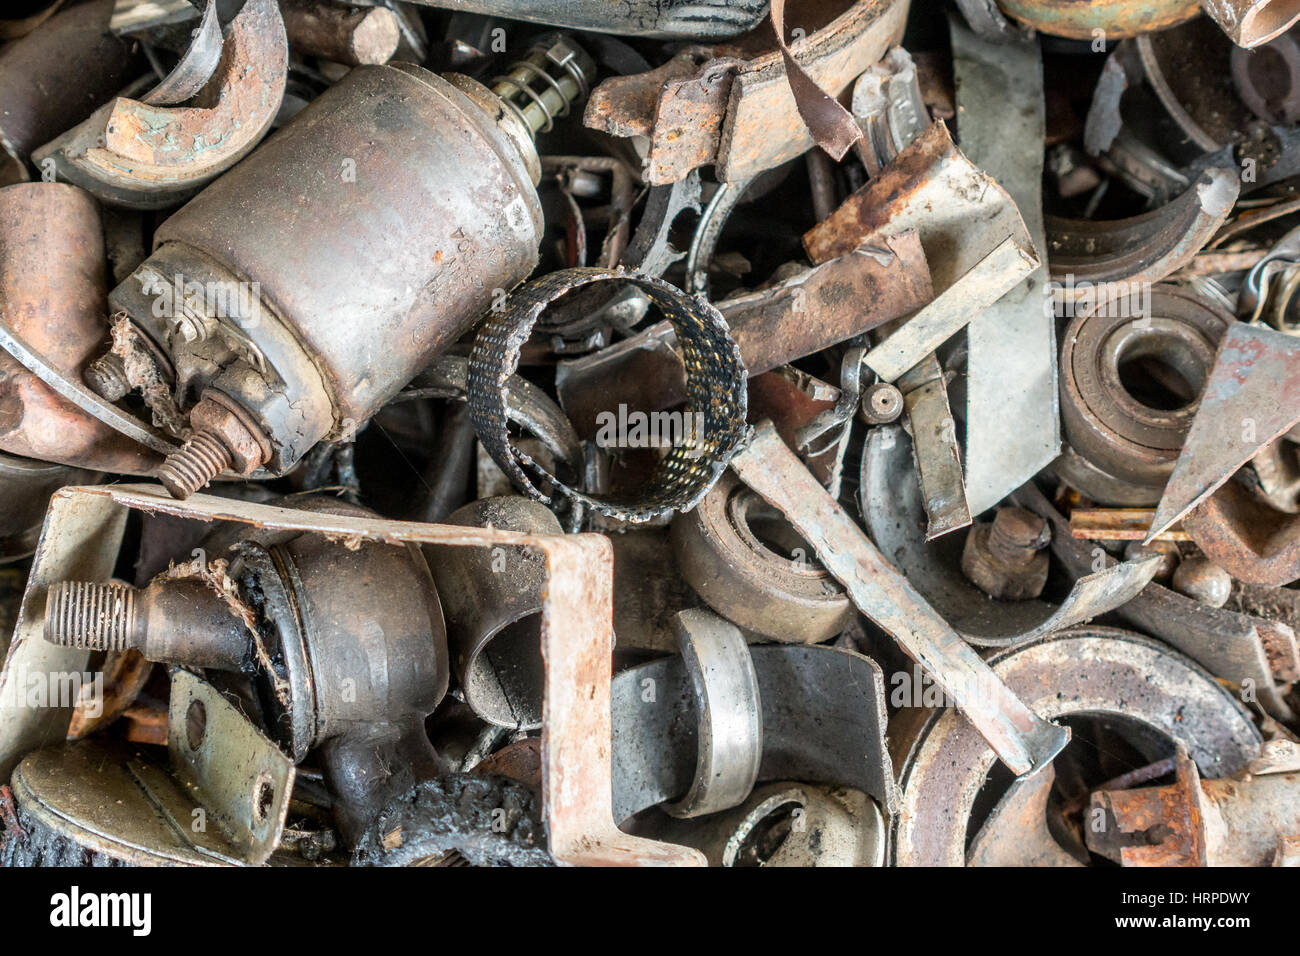 old rusty car parts and bearings Stock Photo